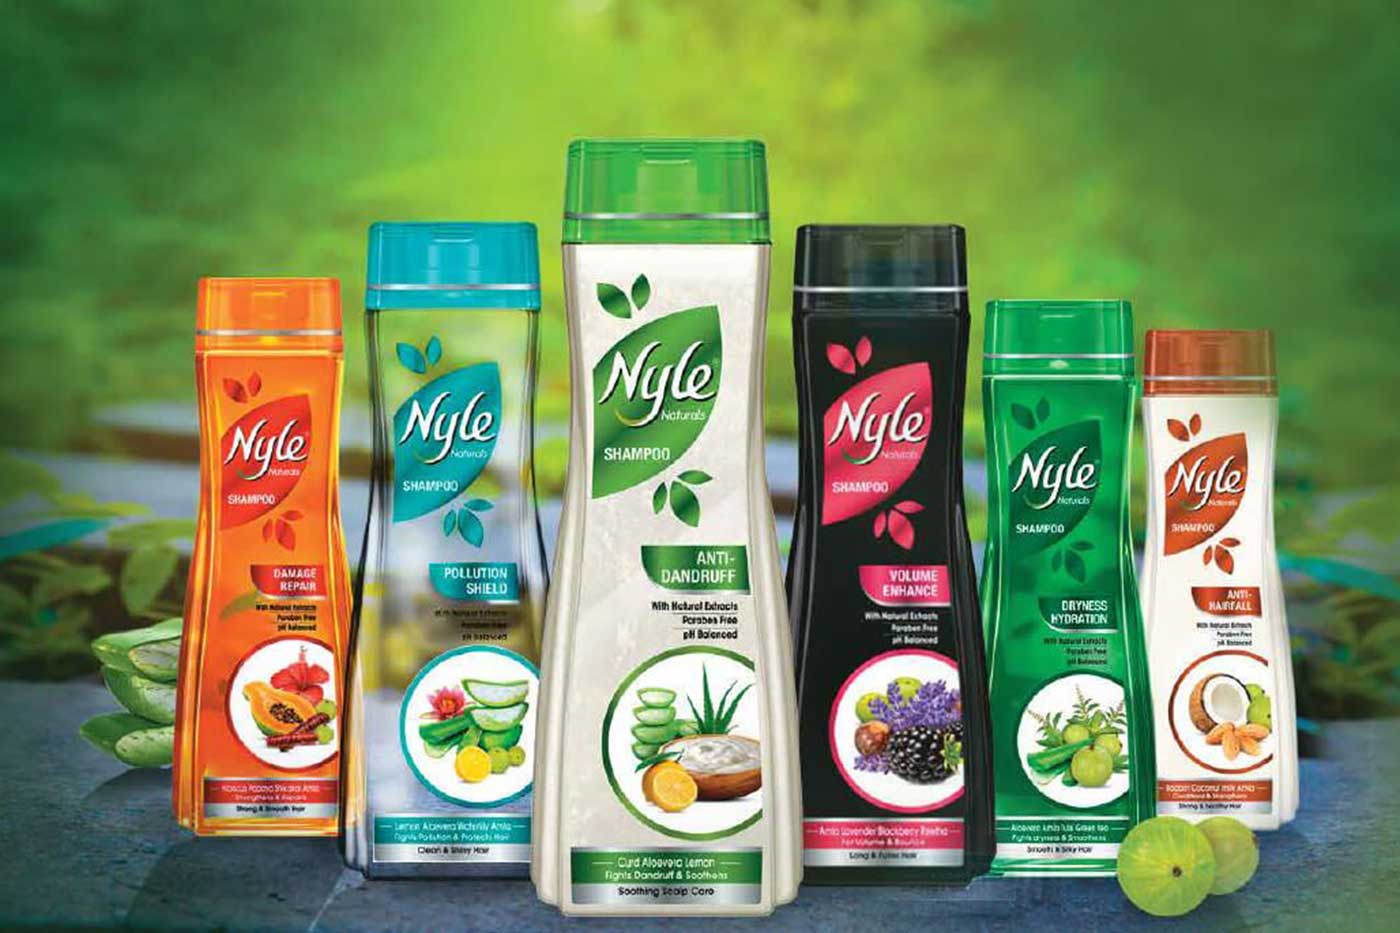 CavineKare launches new hair care products through Nyle Naturals brand -  StyleSpeak